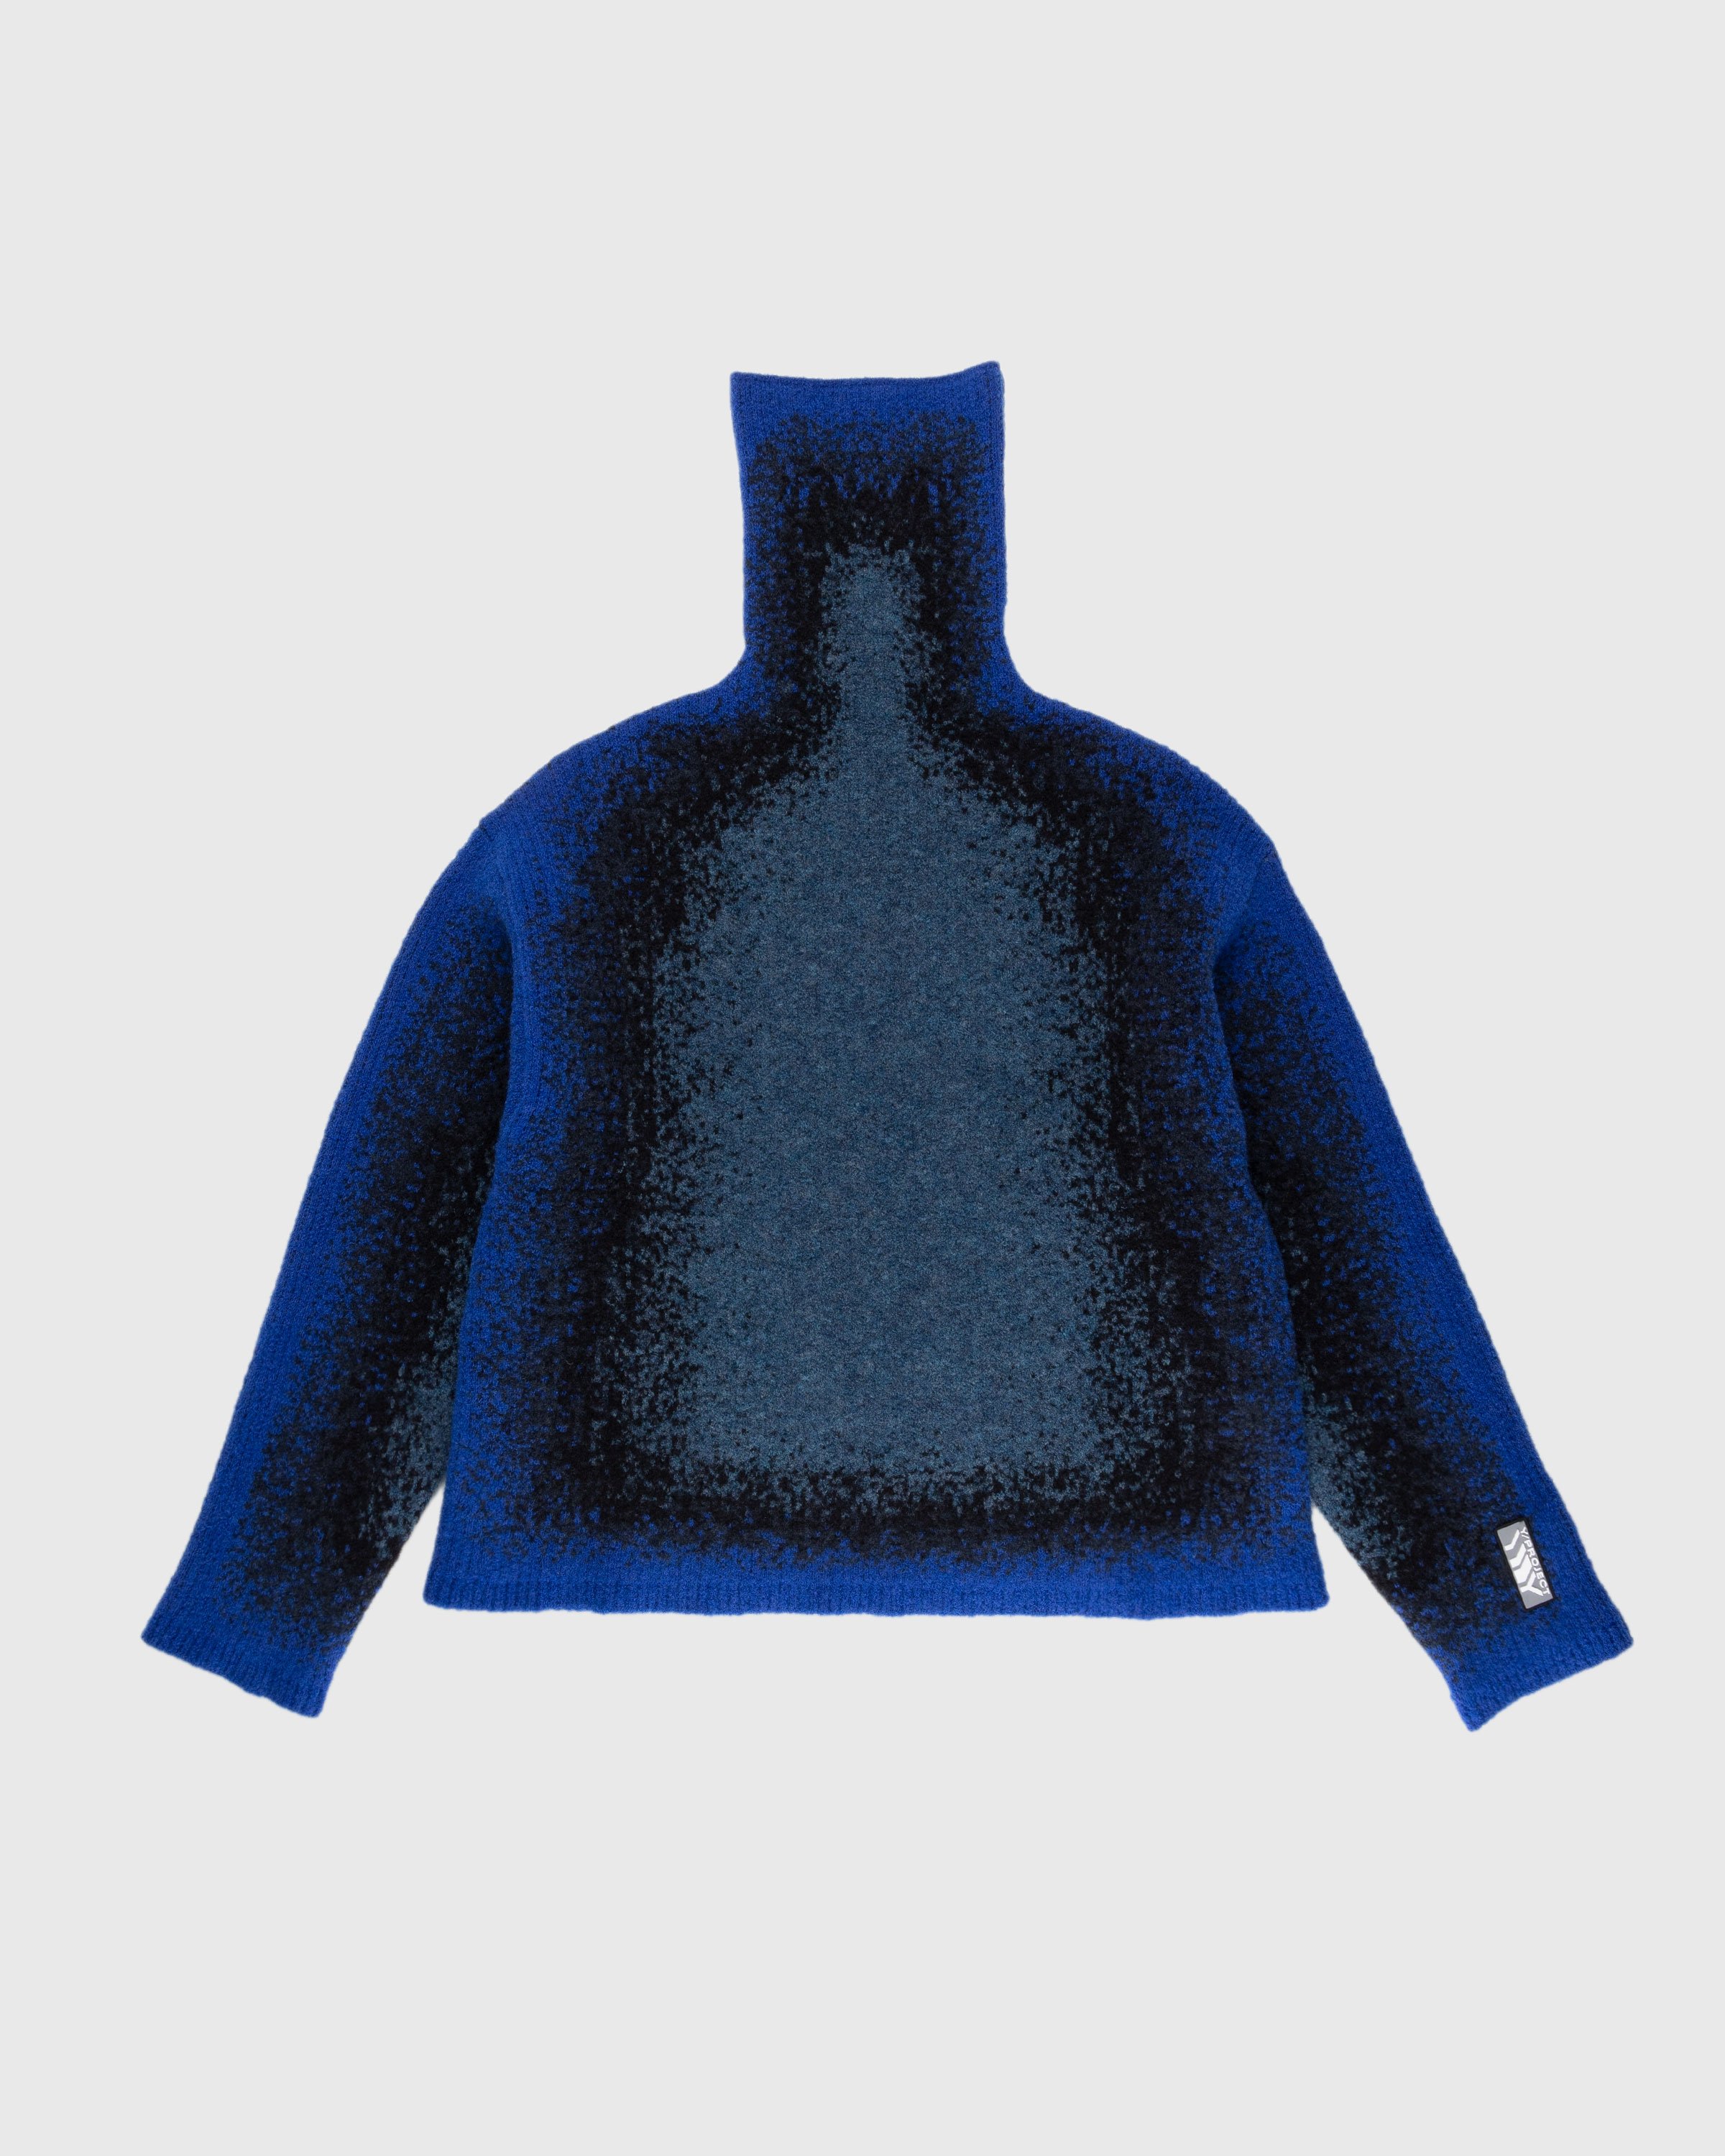 Y/Project - Gradient Heavy Knit Turtleneck Blue - Clothing - Blue - Image 1